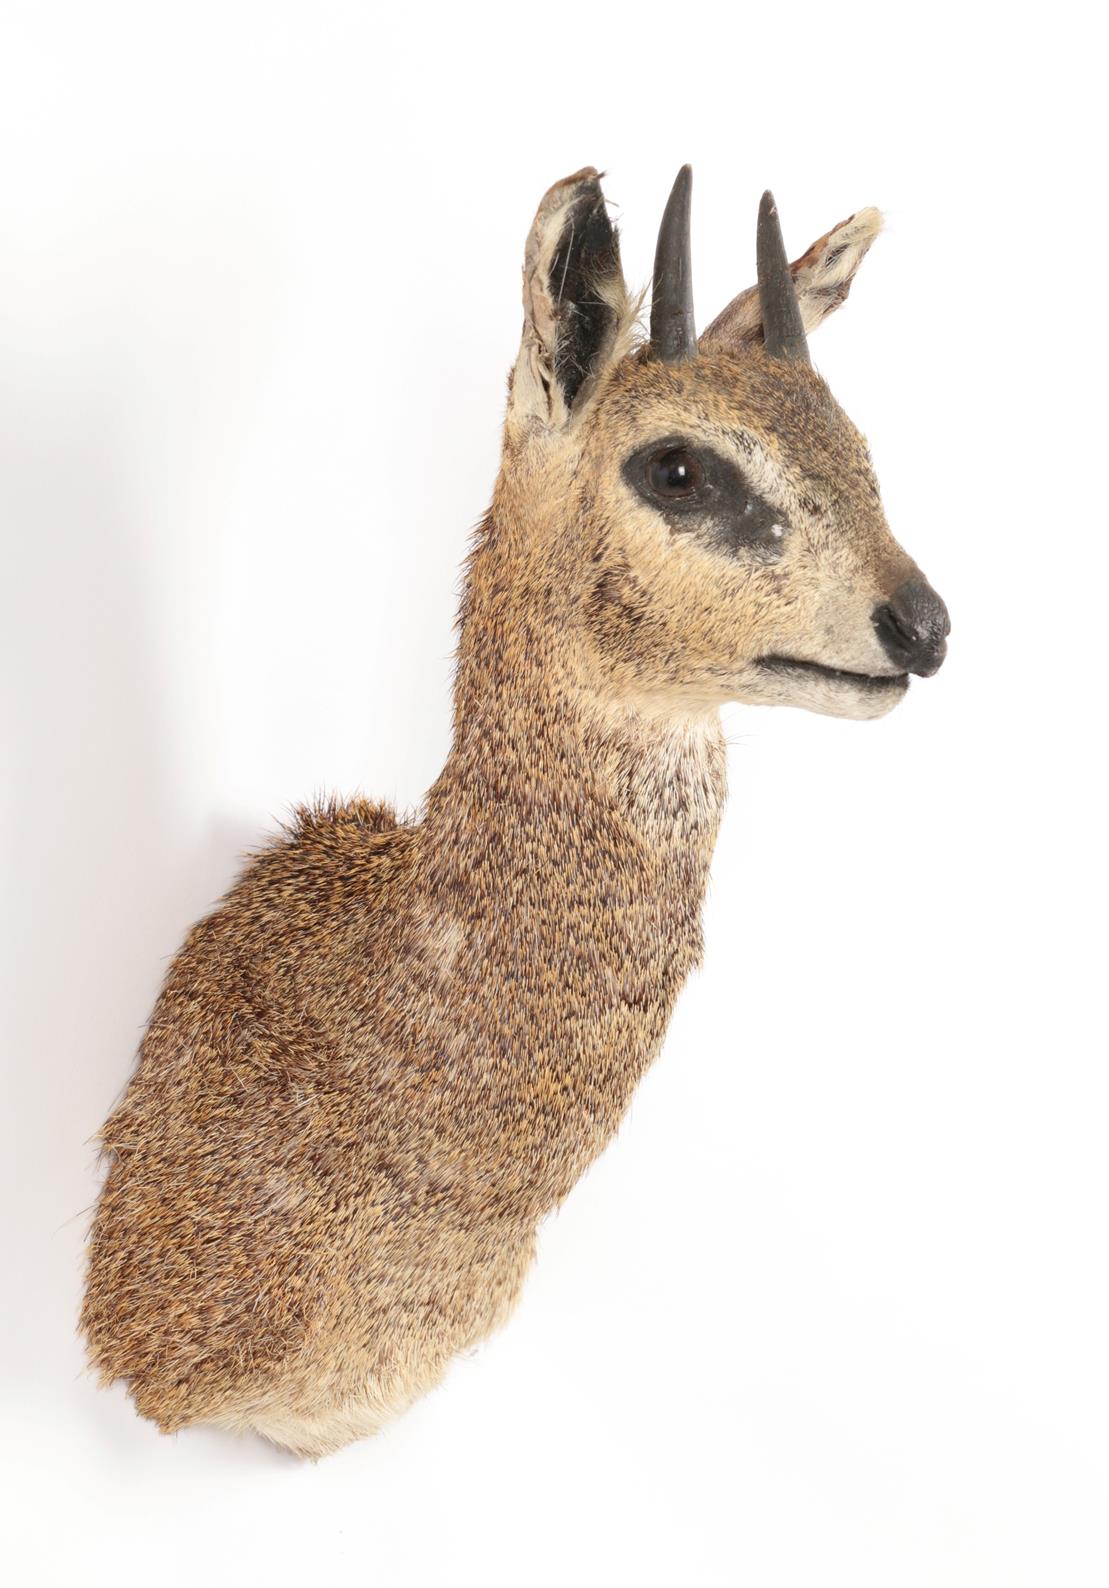 Taxidermy: Cape Klipspringer (Oreotragus oreotragus), modern, South Africa, high quality adult - Image 2 of 2